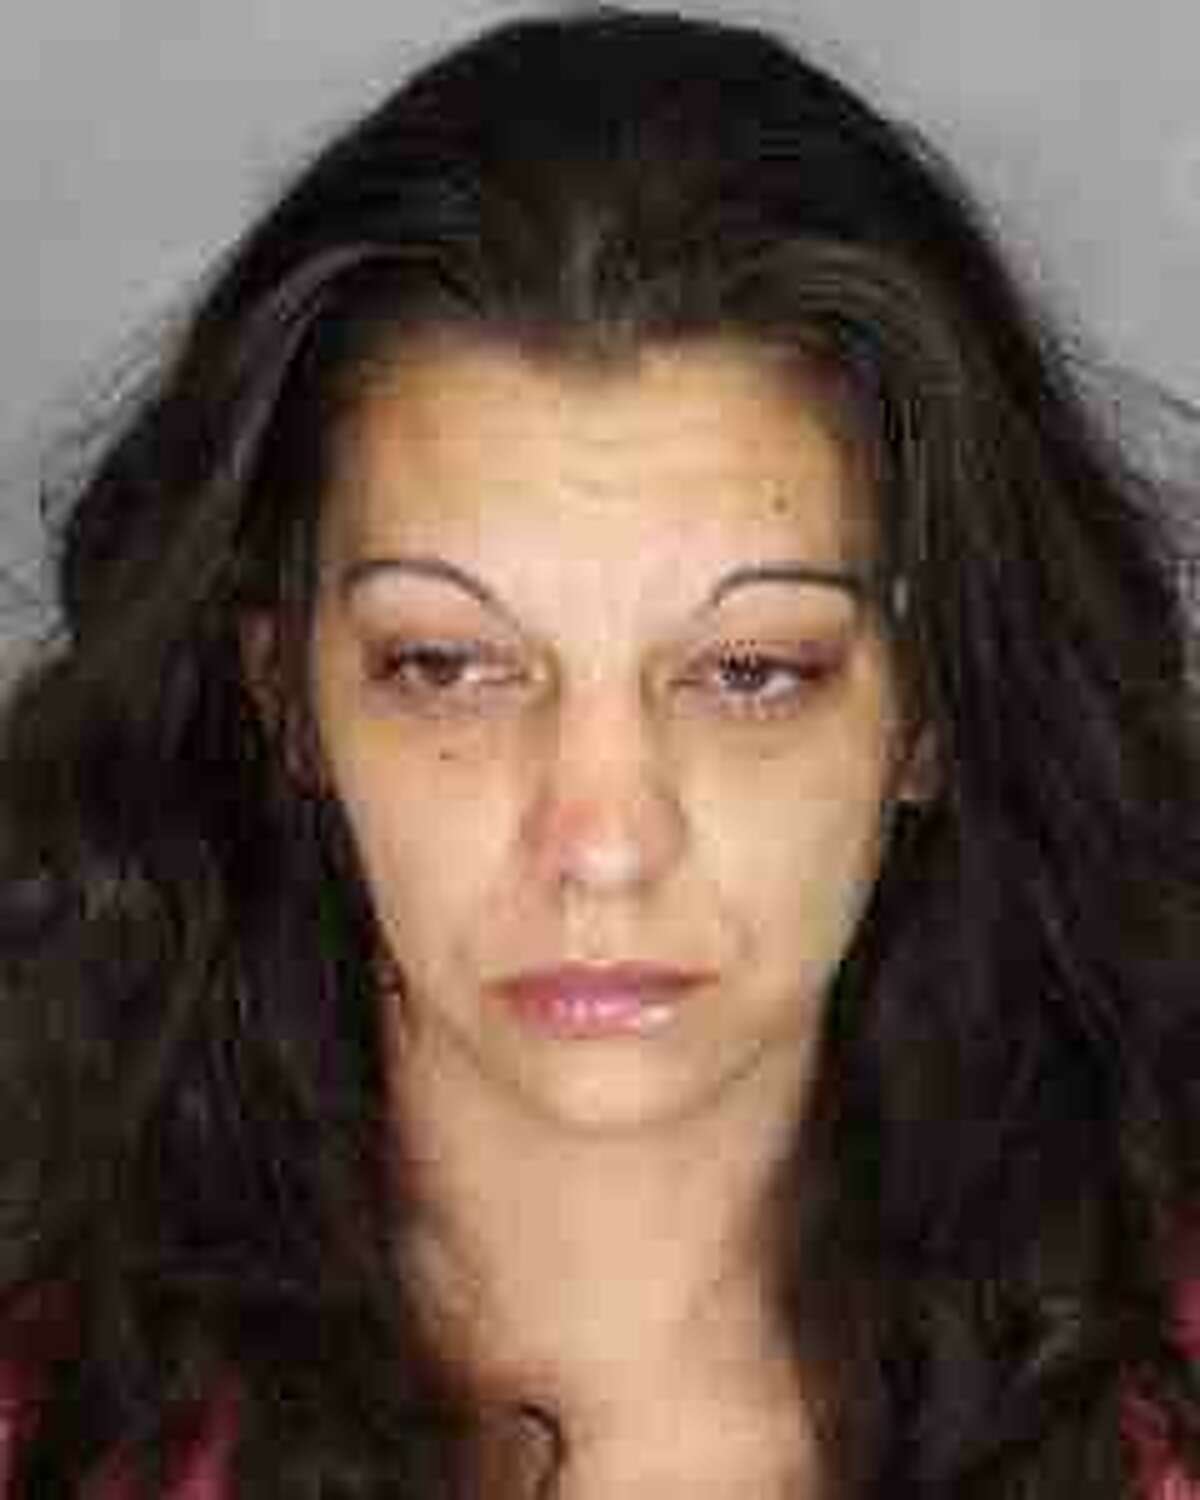 Mother wrapped dead baby in plastic bags, hid him behind Schenectady home, cops